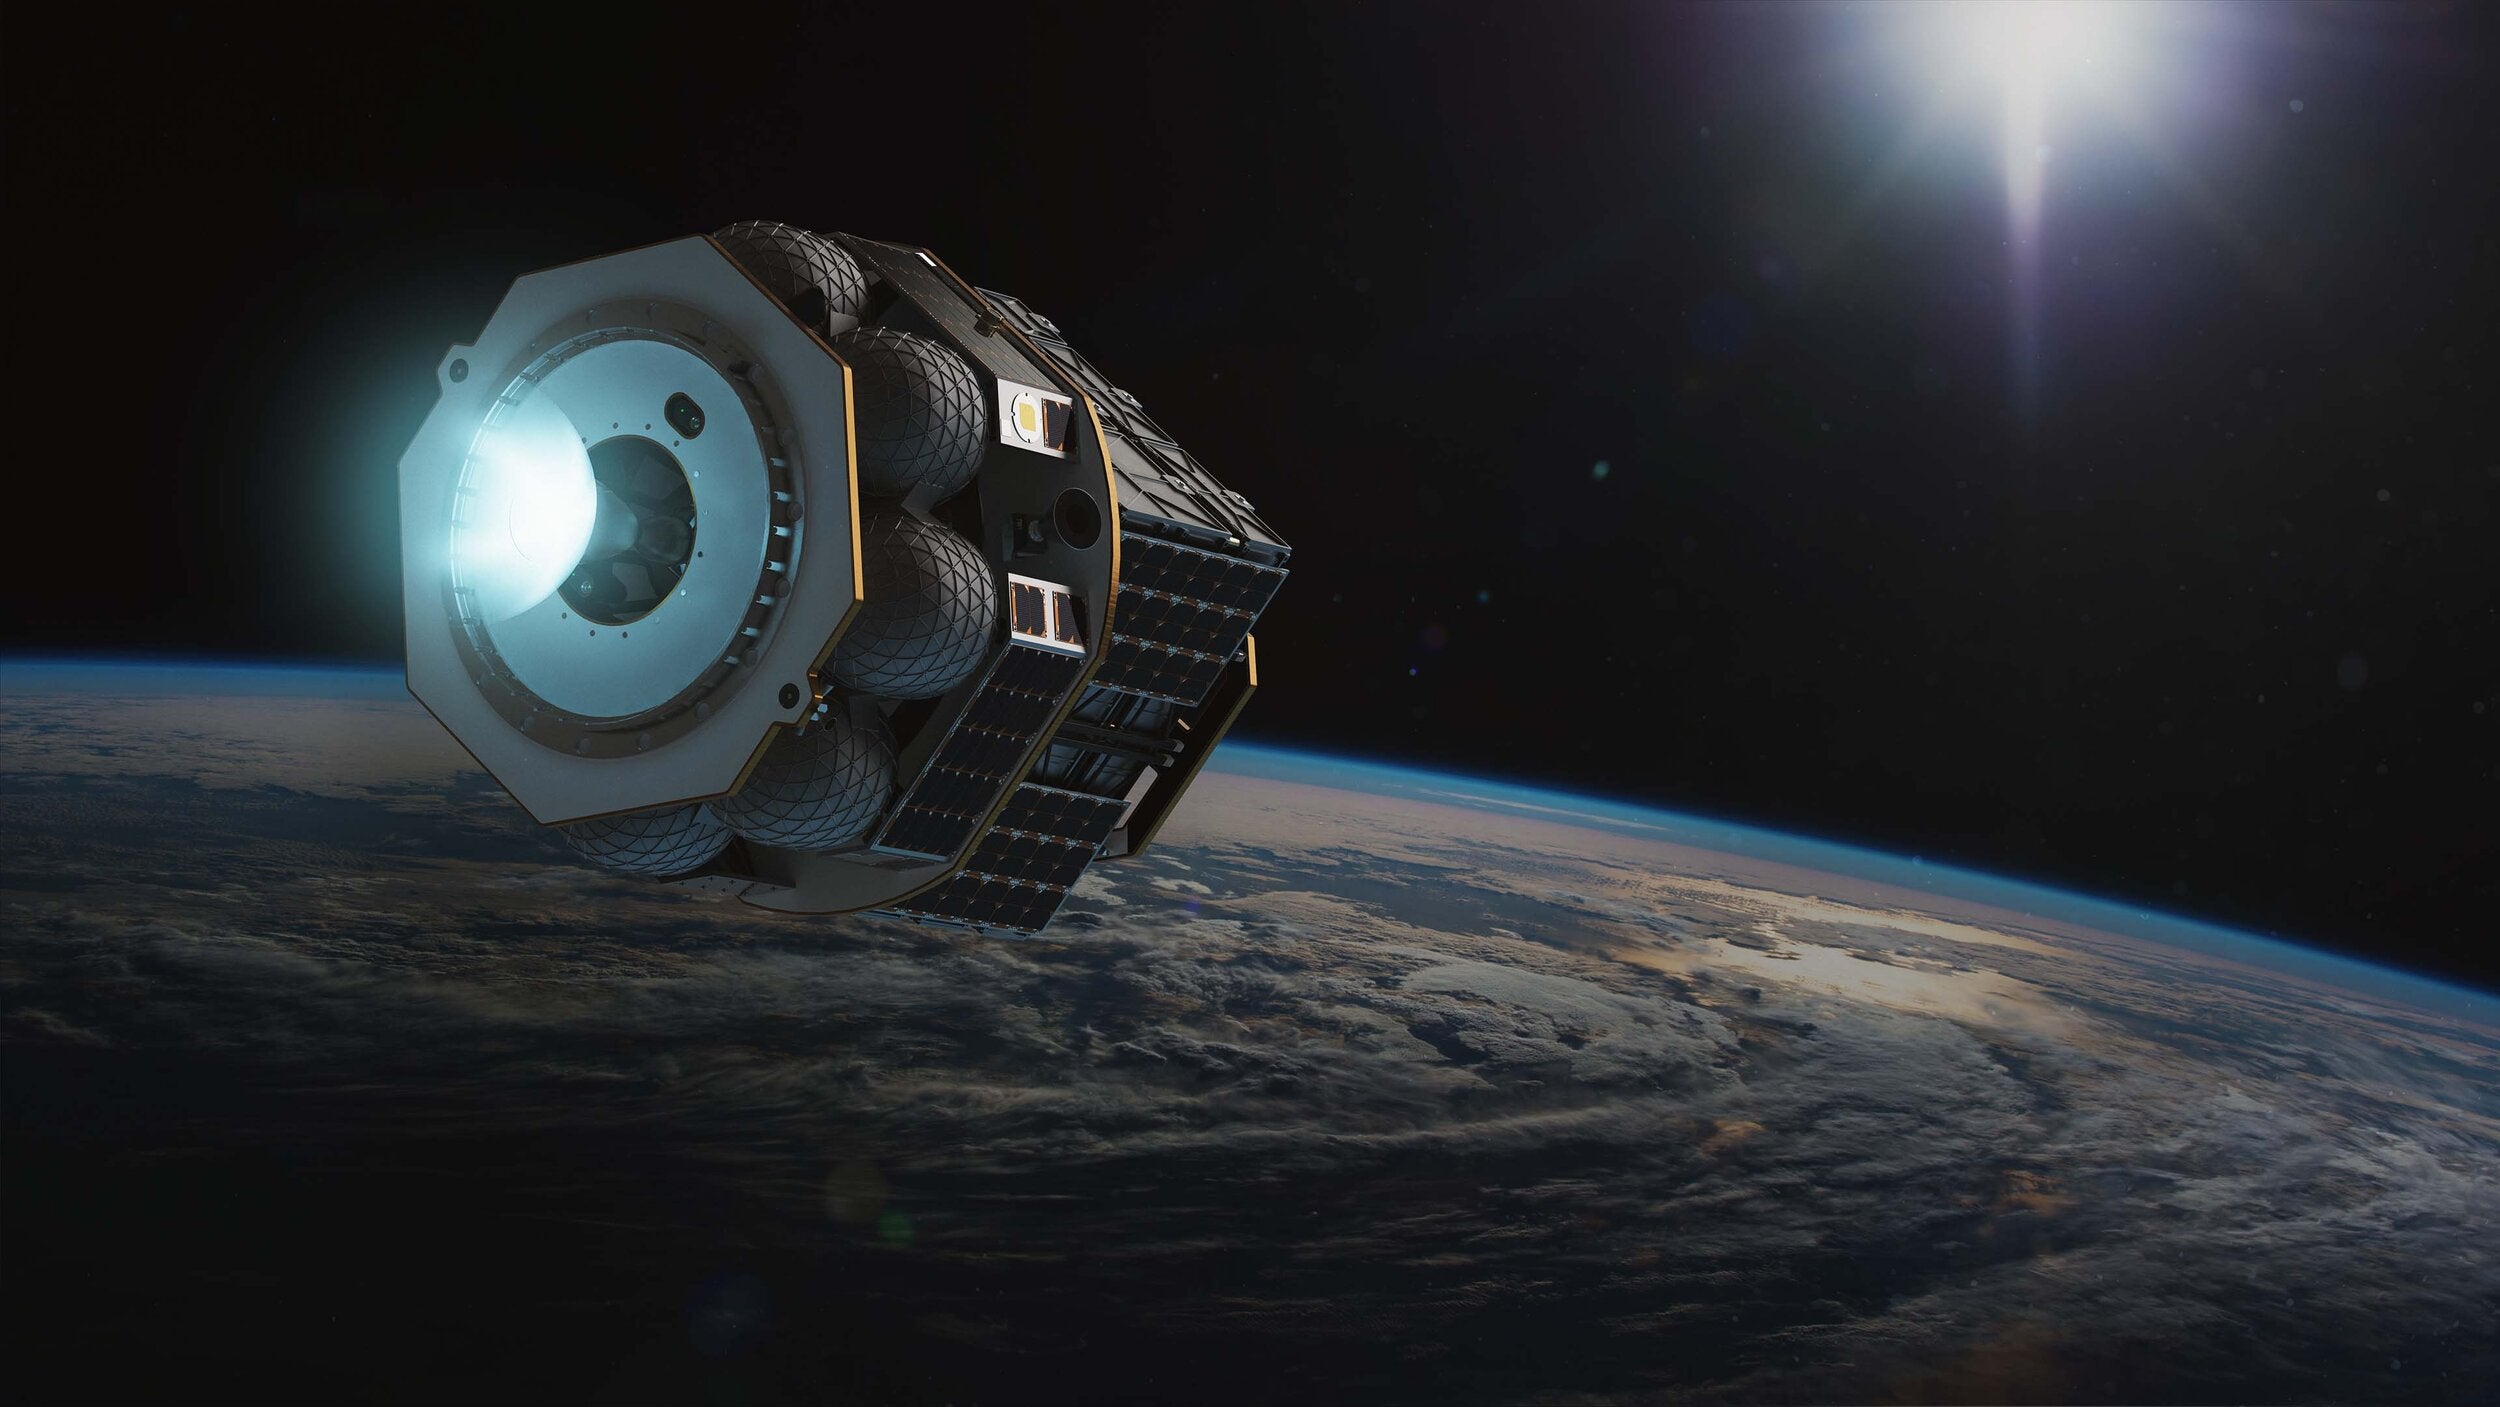 Launcher Unveils Its 'Orbiter' Satellite Deployment Vehicle That Will Be Launched By SpaceX